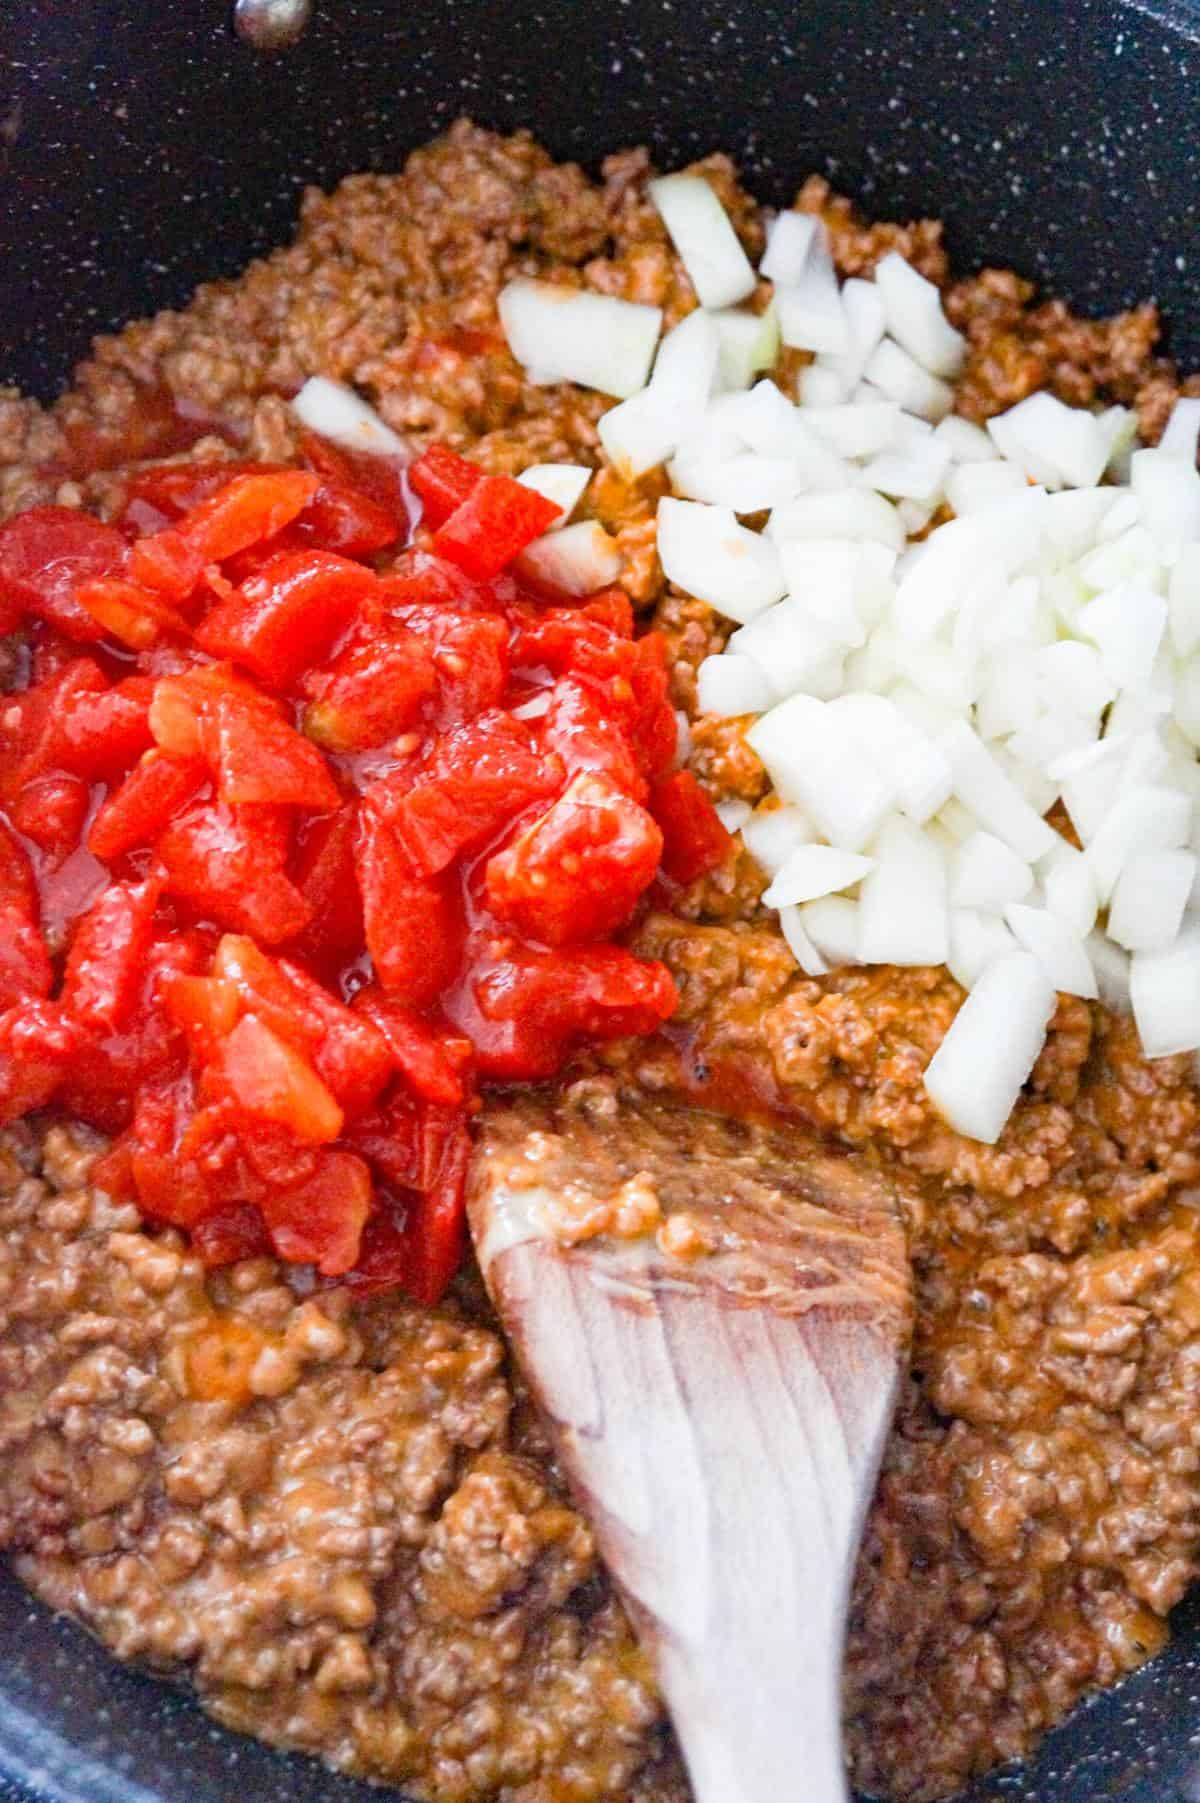 diced tomatoes and diced onions on top of ground beef mixture in a saute pan